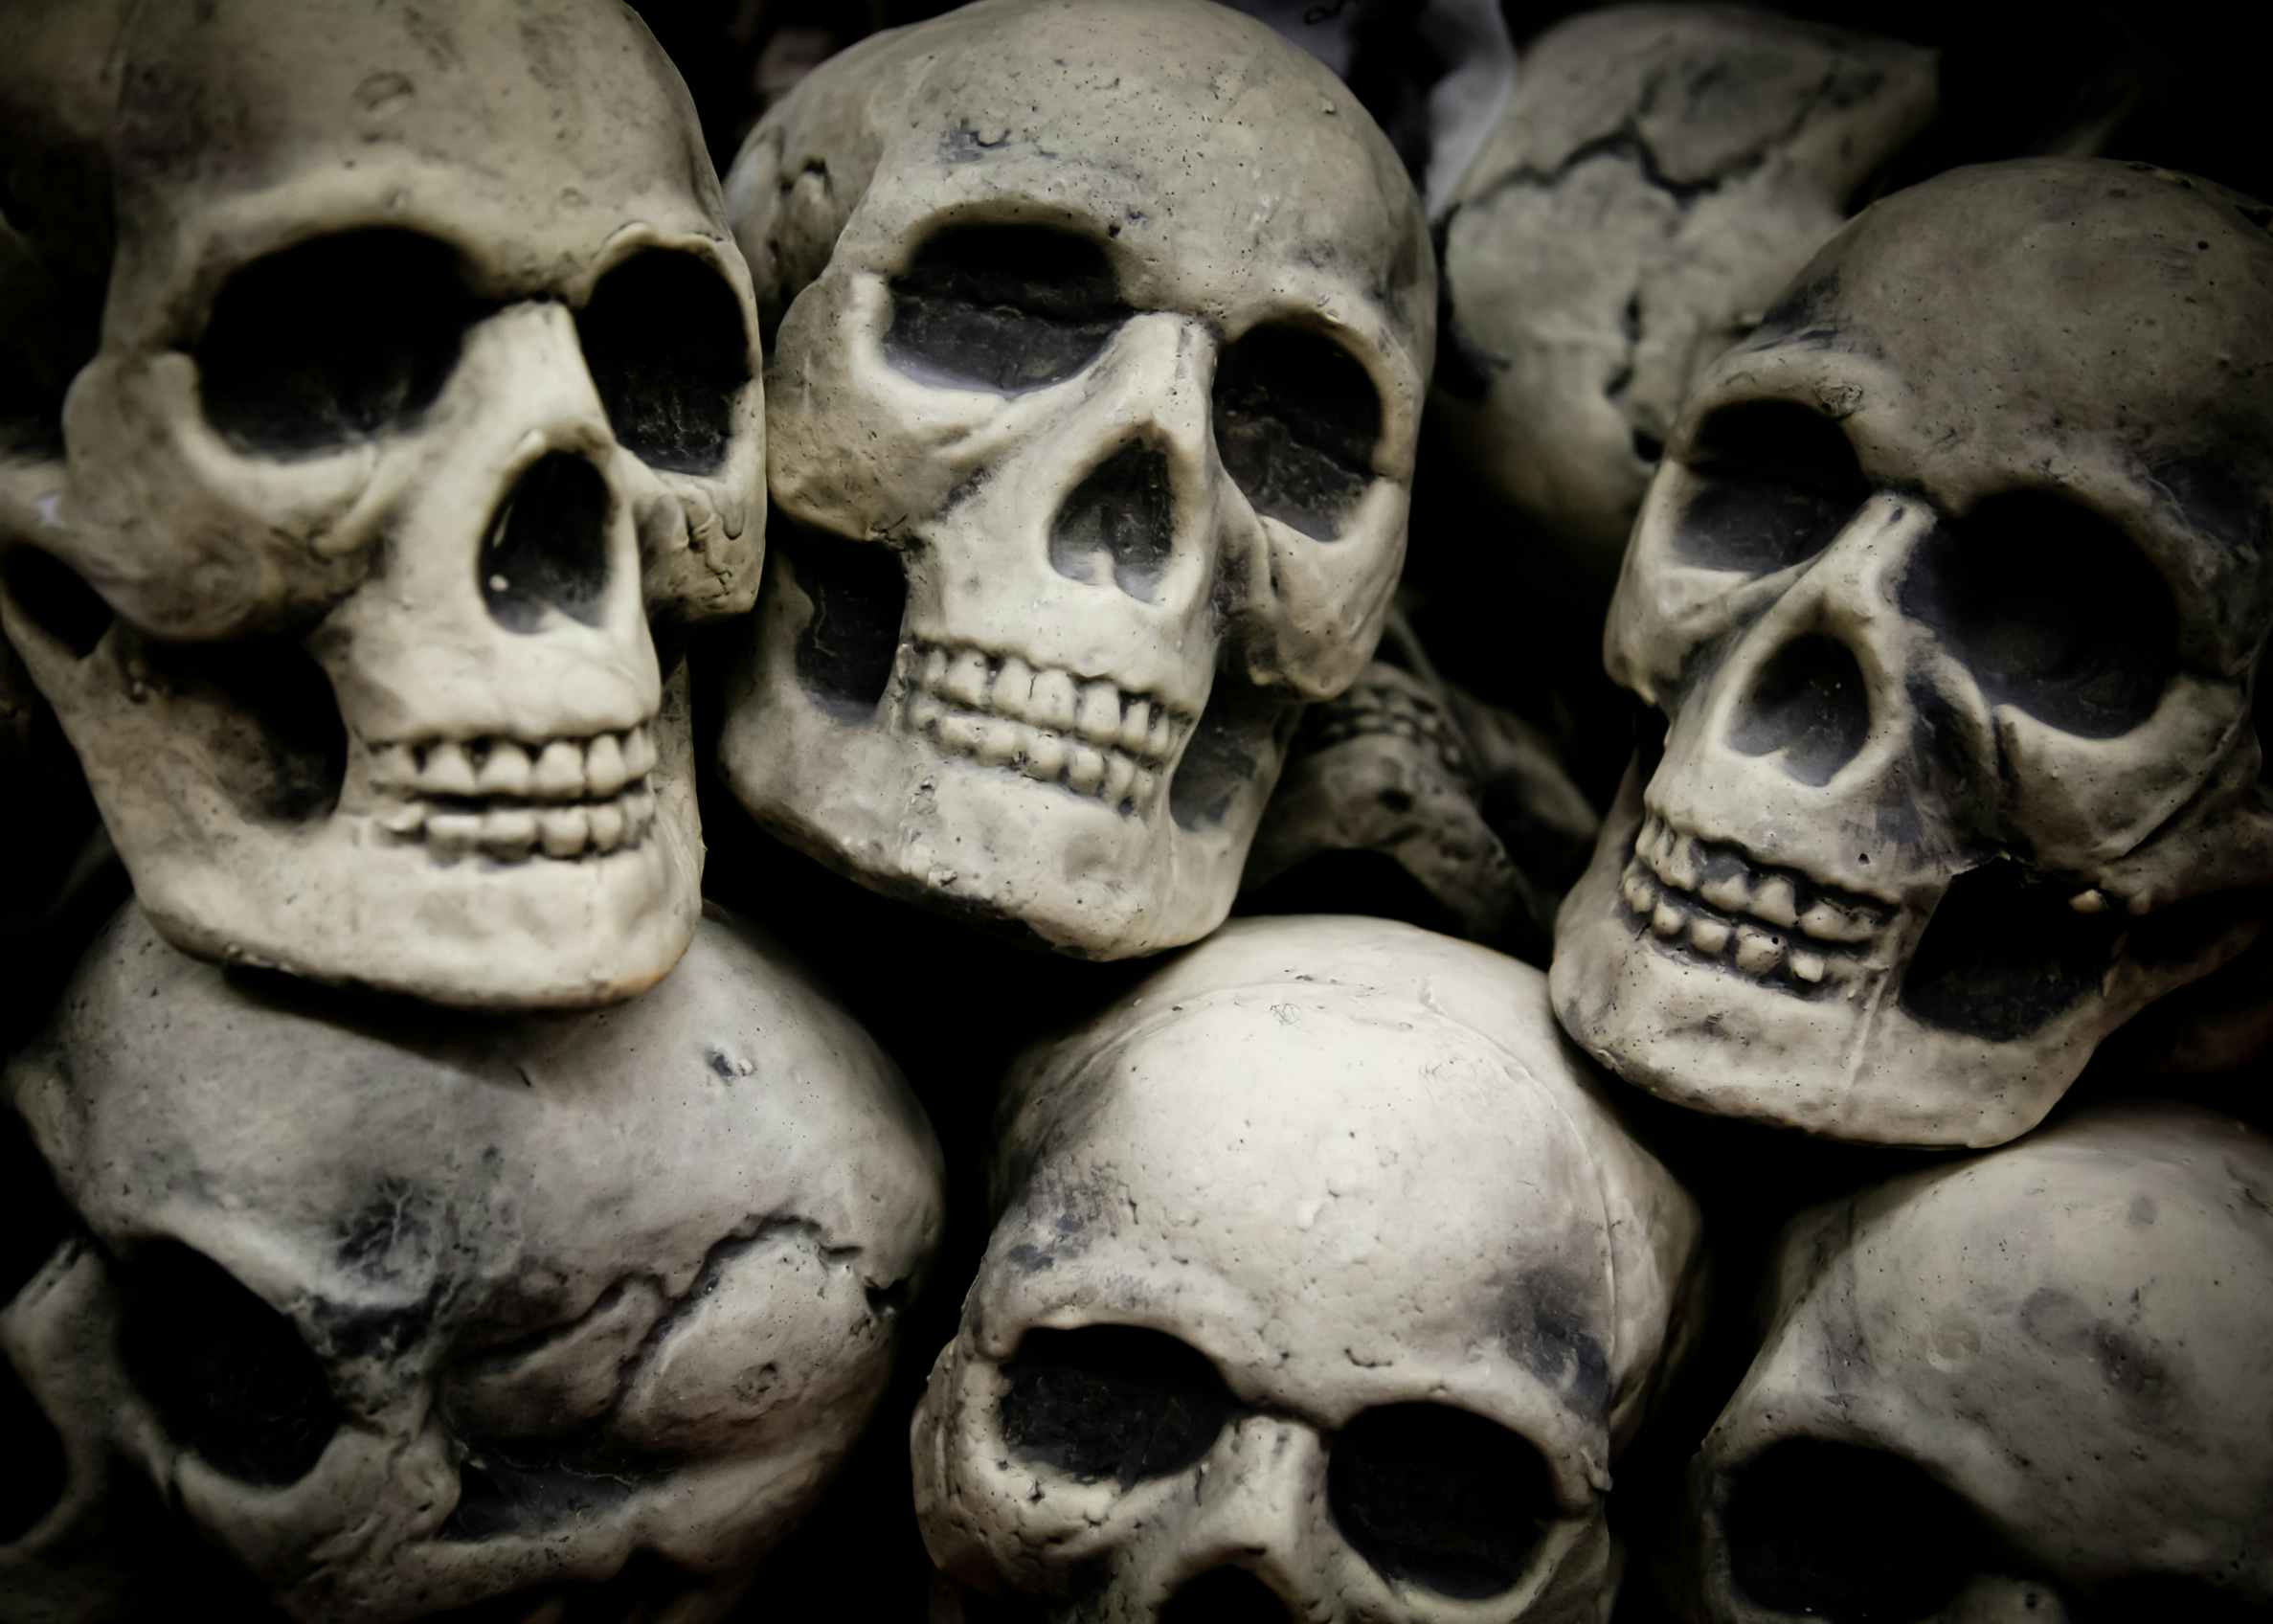 A close up on a pile of decorative skulls.